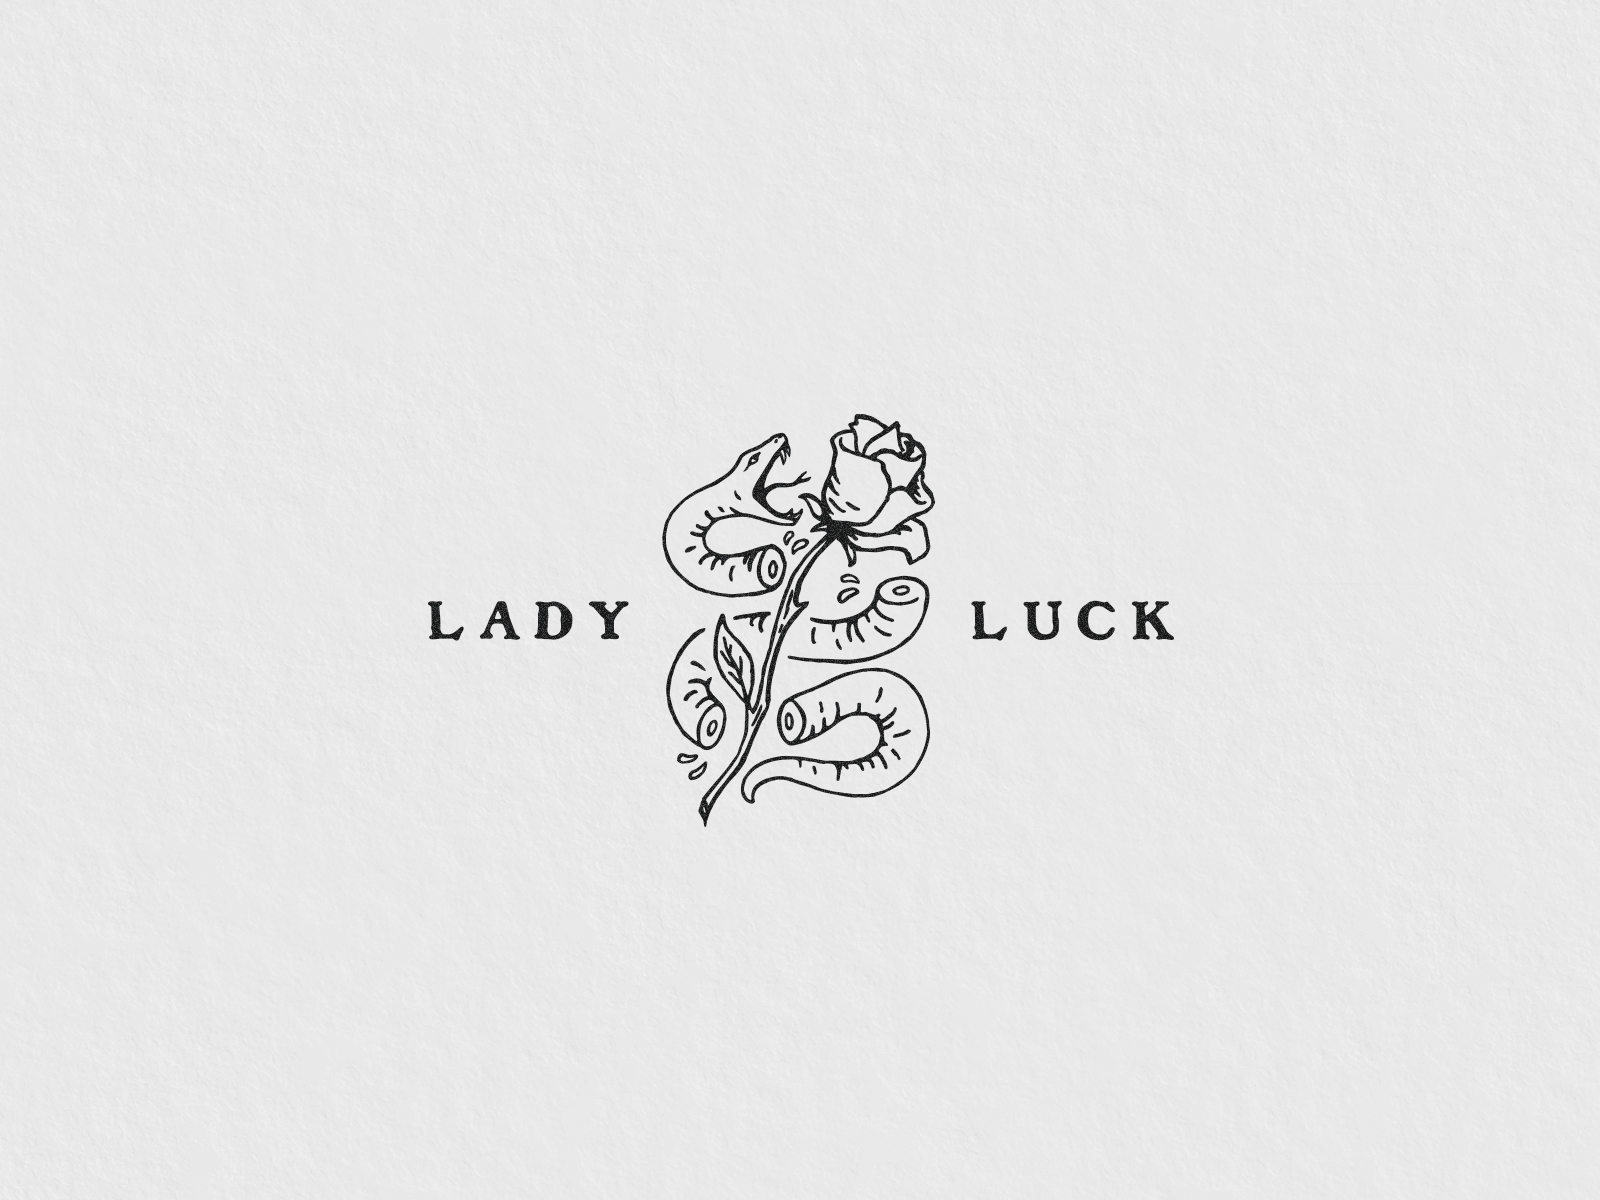 Lady Luck Tattoo ladylucktattoo777  Instagram photos and videos